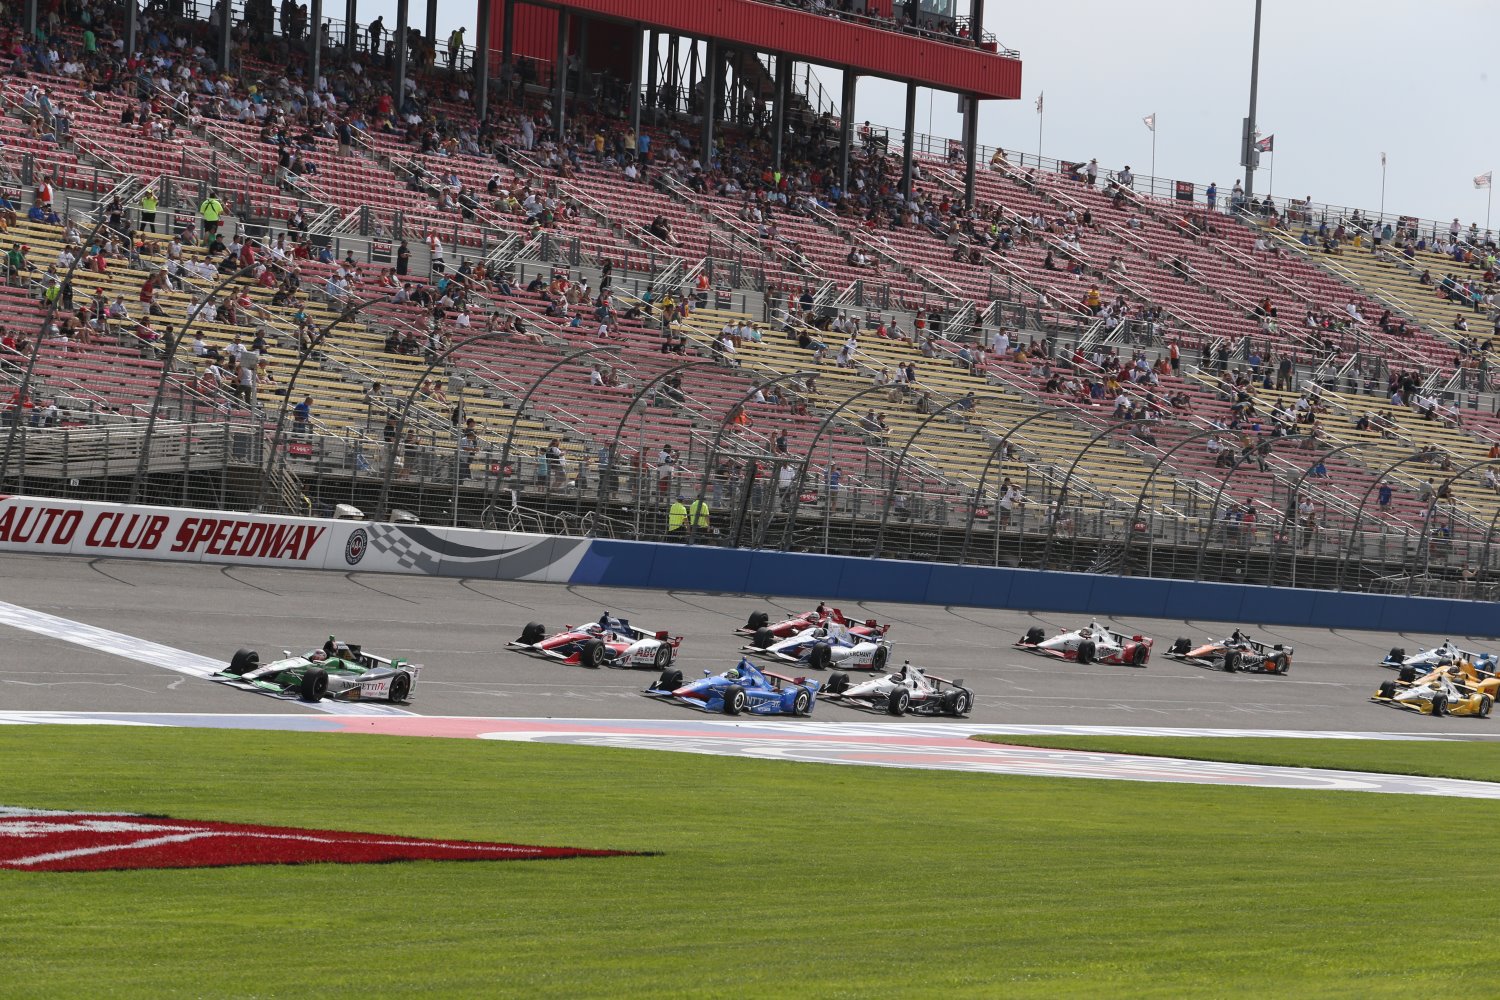 IndyCar put on its greatest show in decades and now Fontana won't return to the 2016 schedule. Can they do anything right?